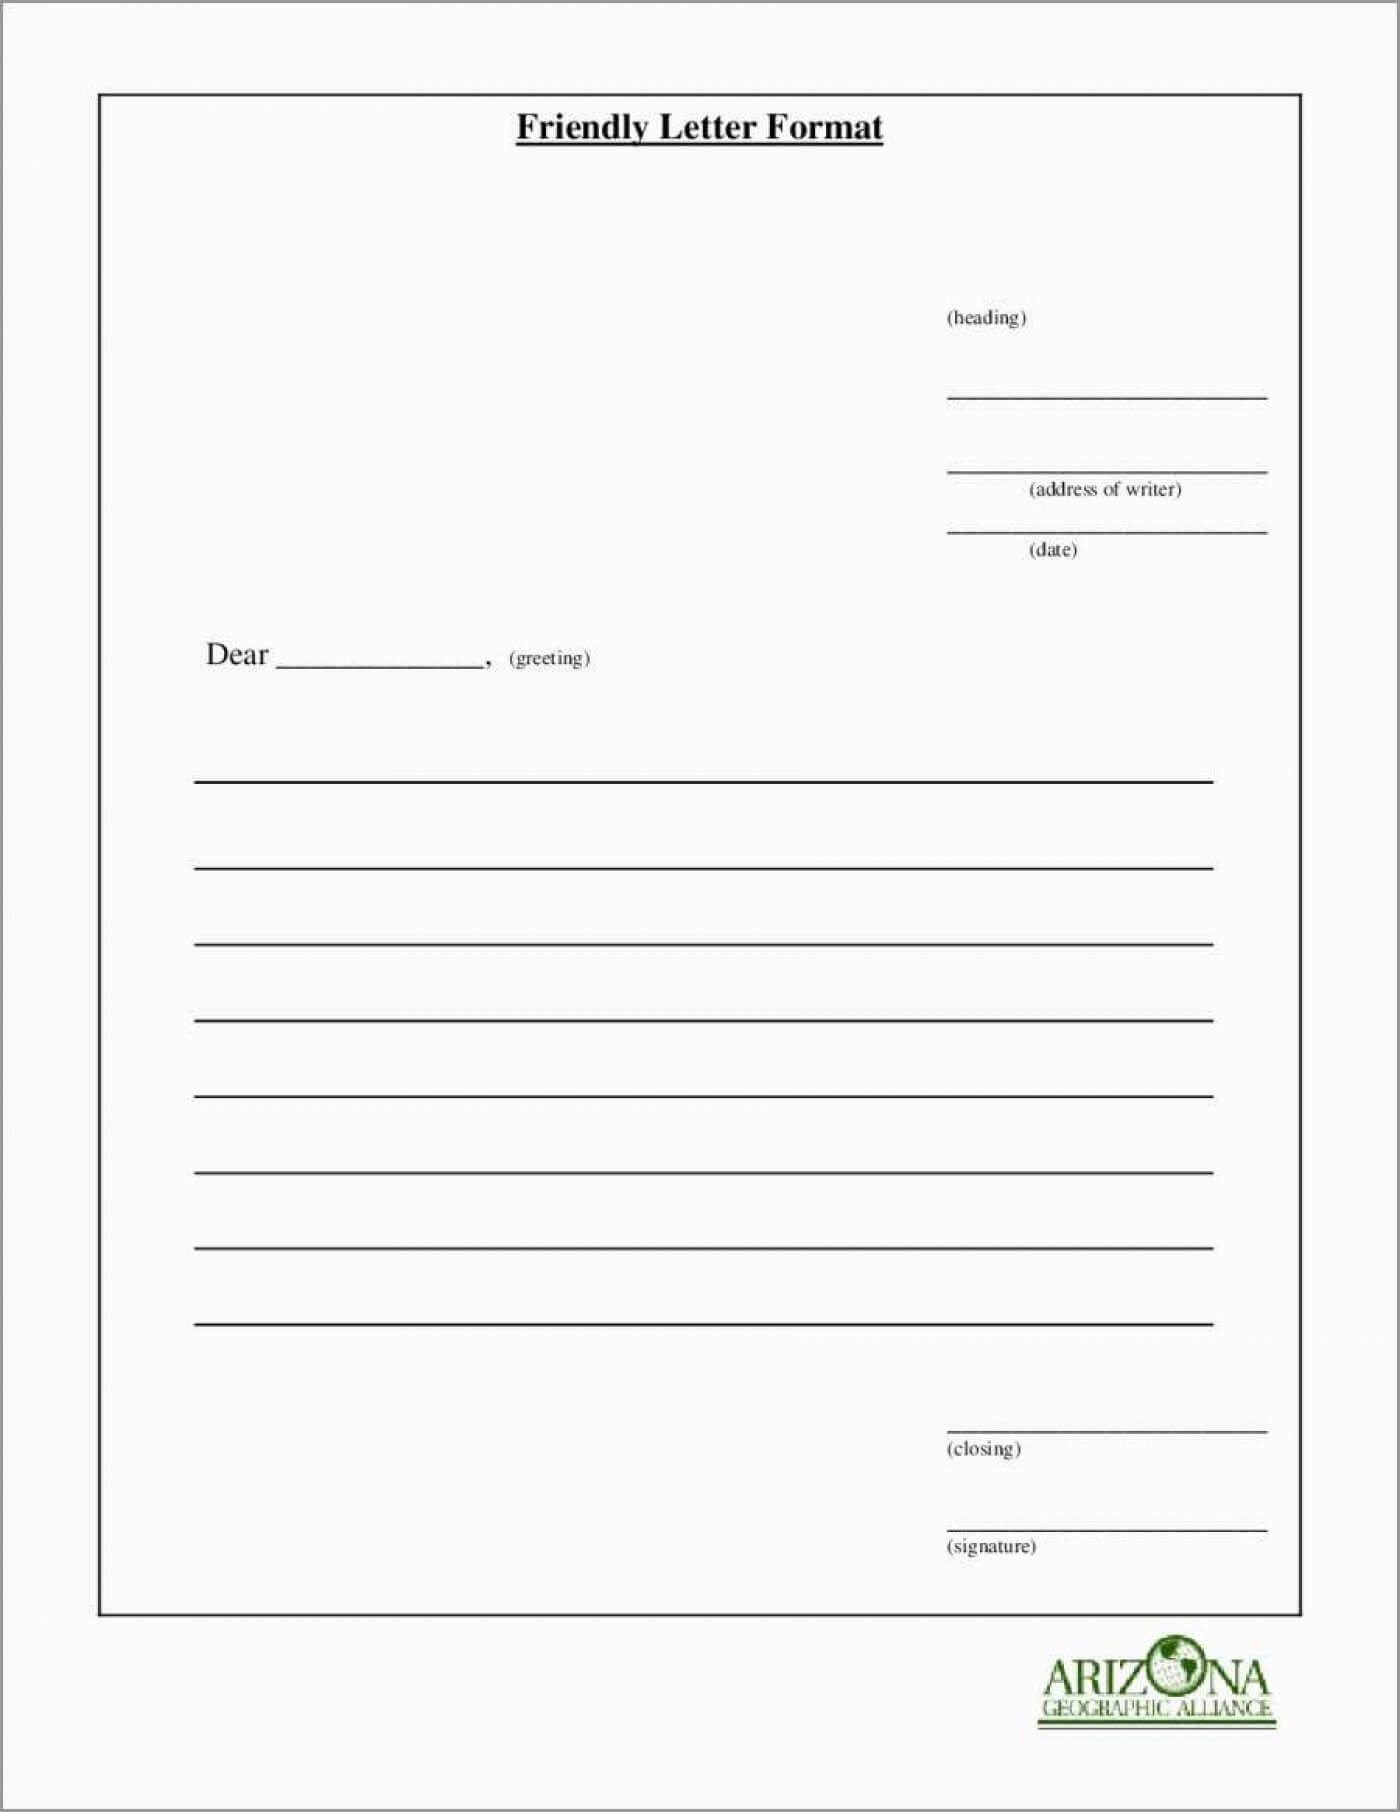 002 Free Letter Writing Template Ideas Best Online Format Inside Blank Letter Writing Template For Kids